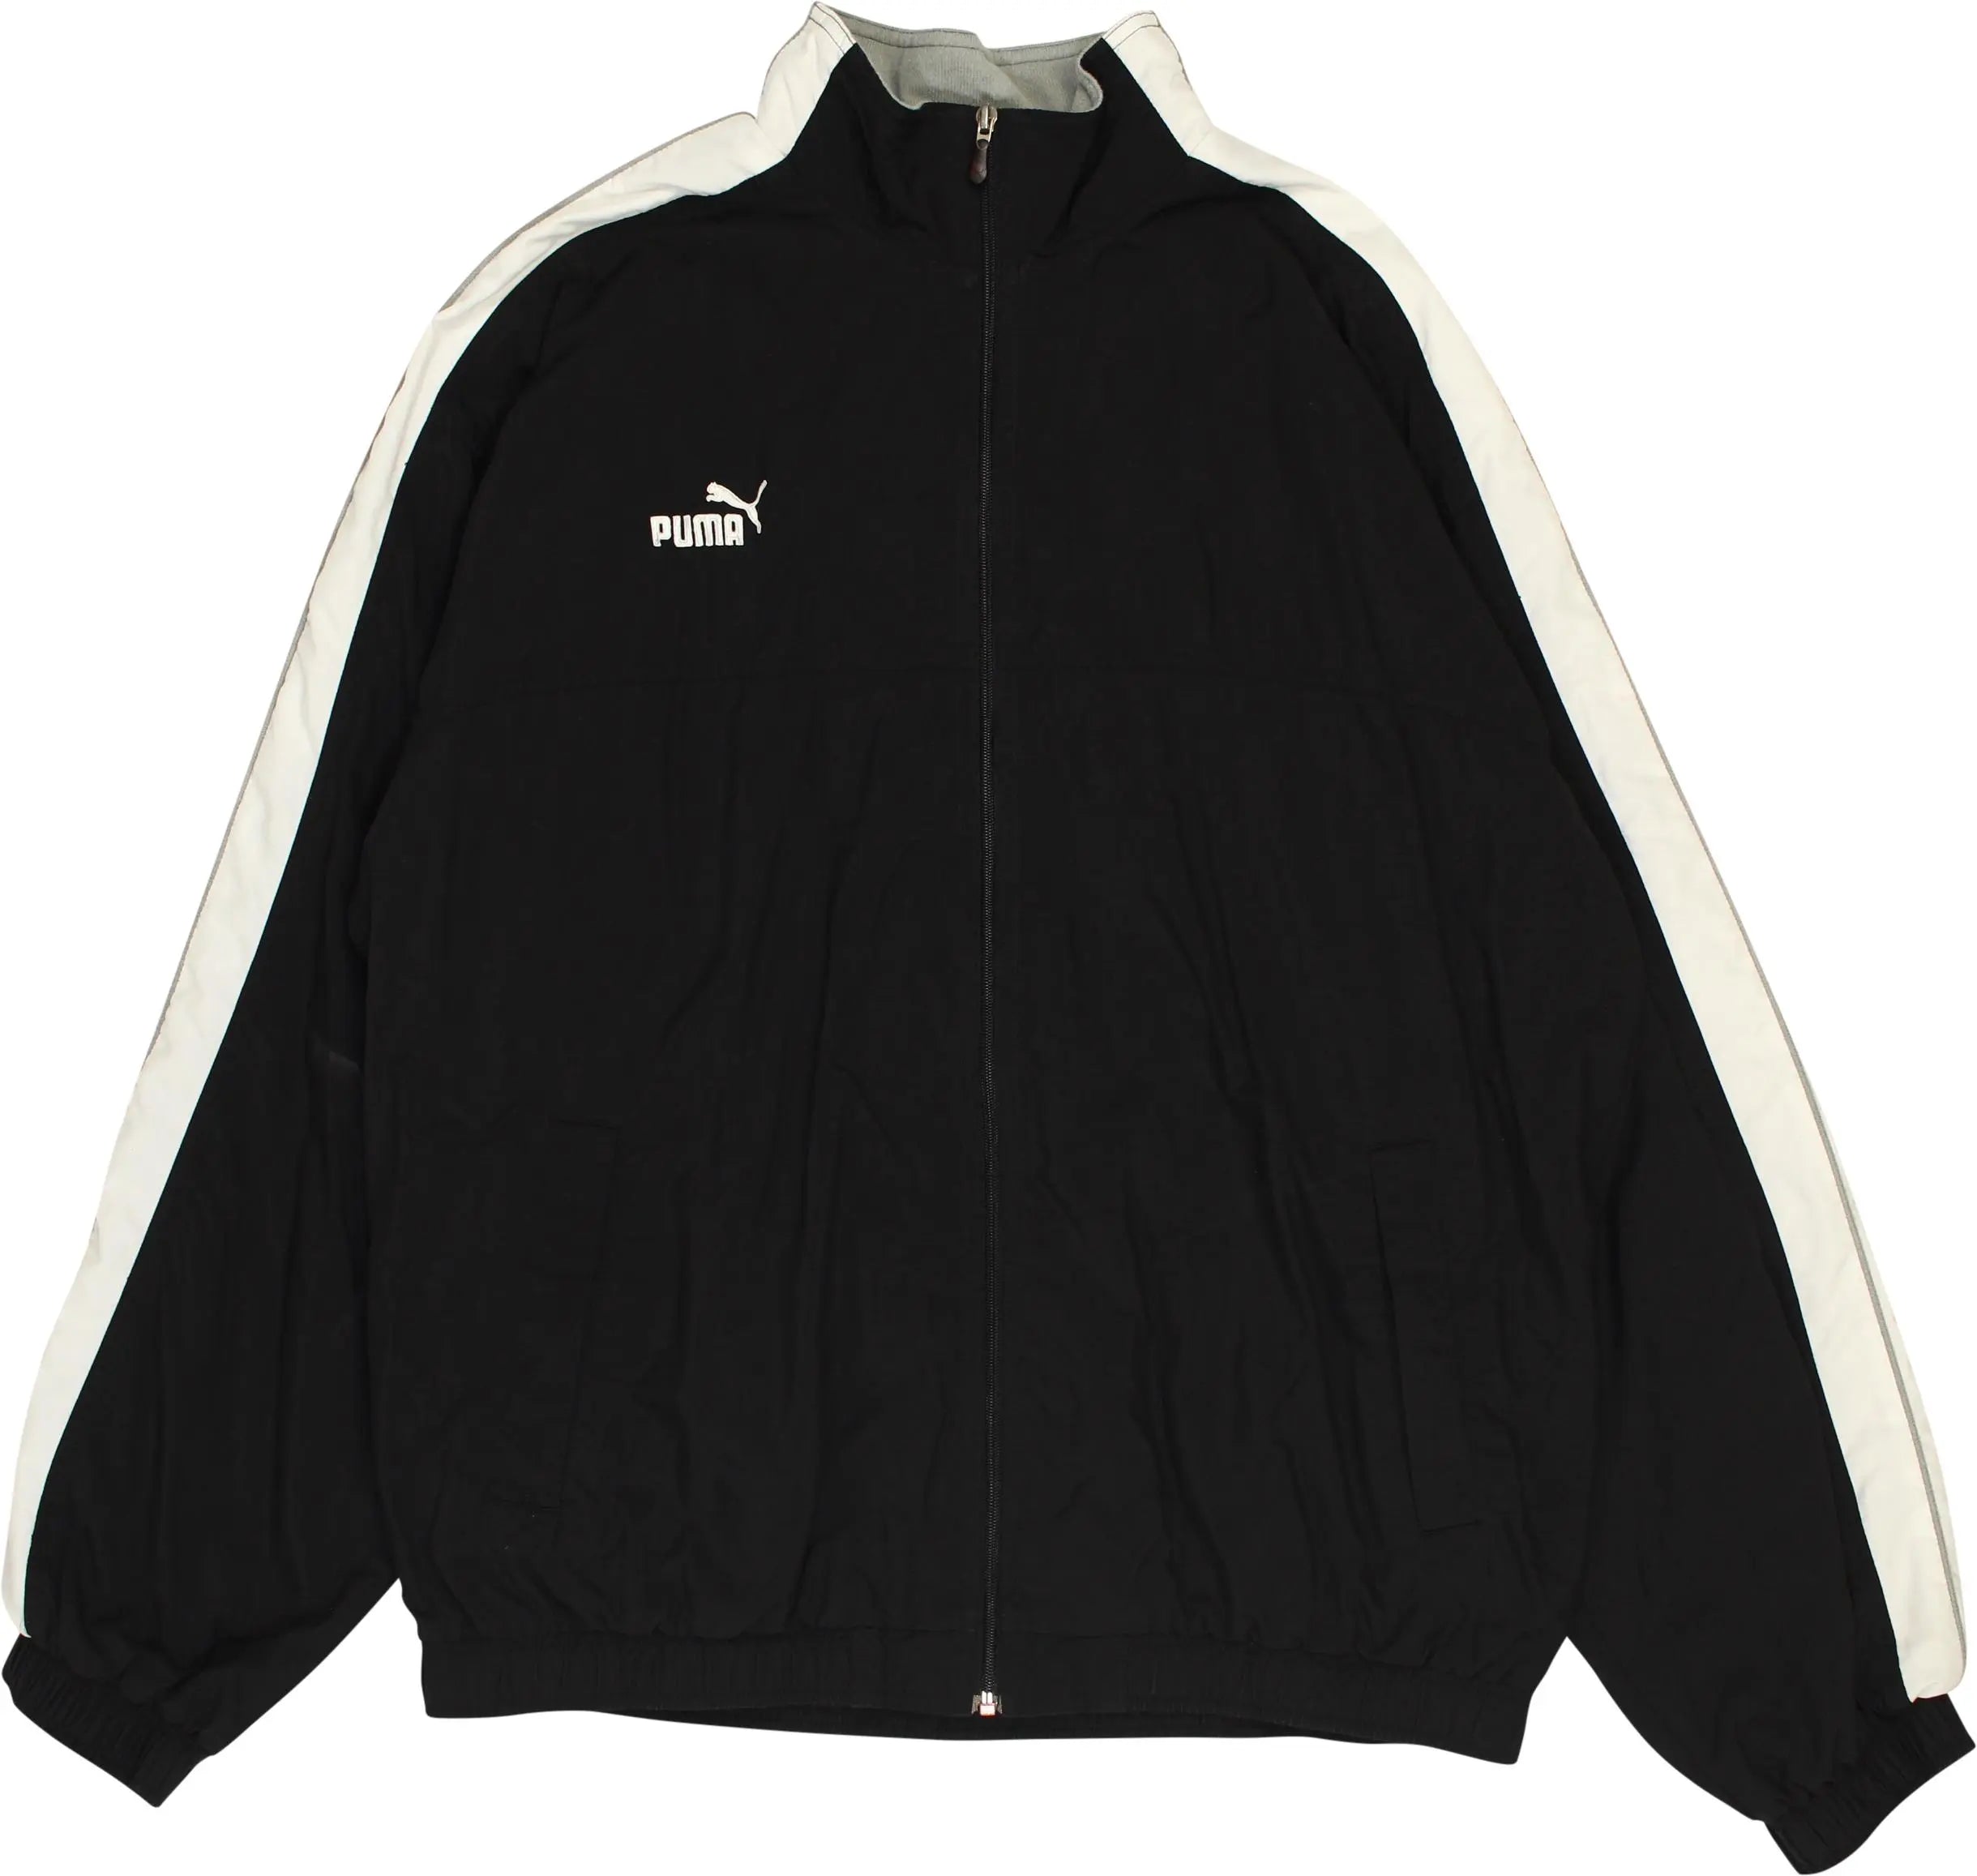 Puma - 90s Black Sport Jacket by Puma- ThriftTale.com - Vintage and second handclothing